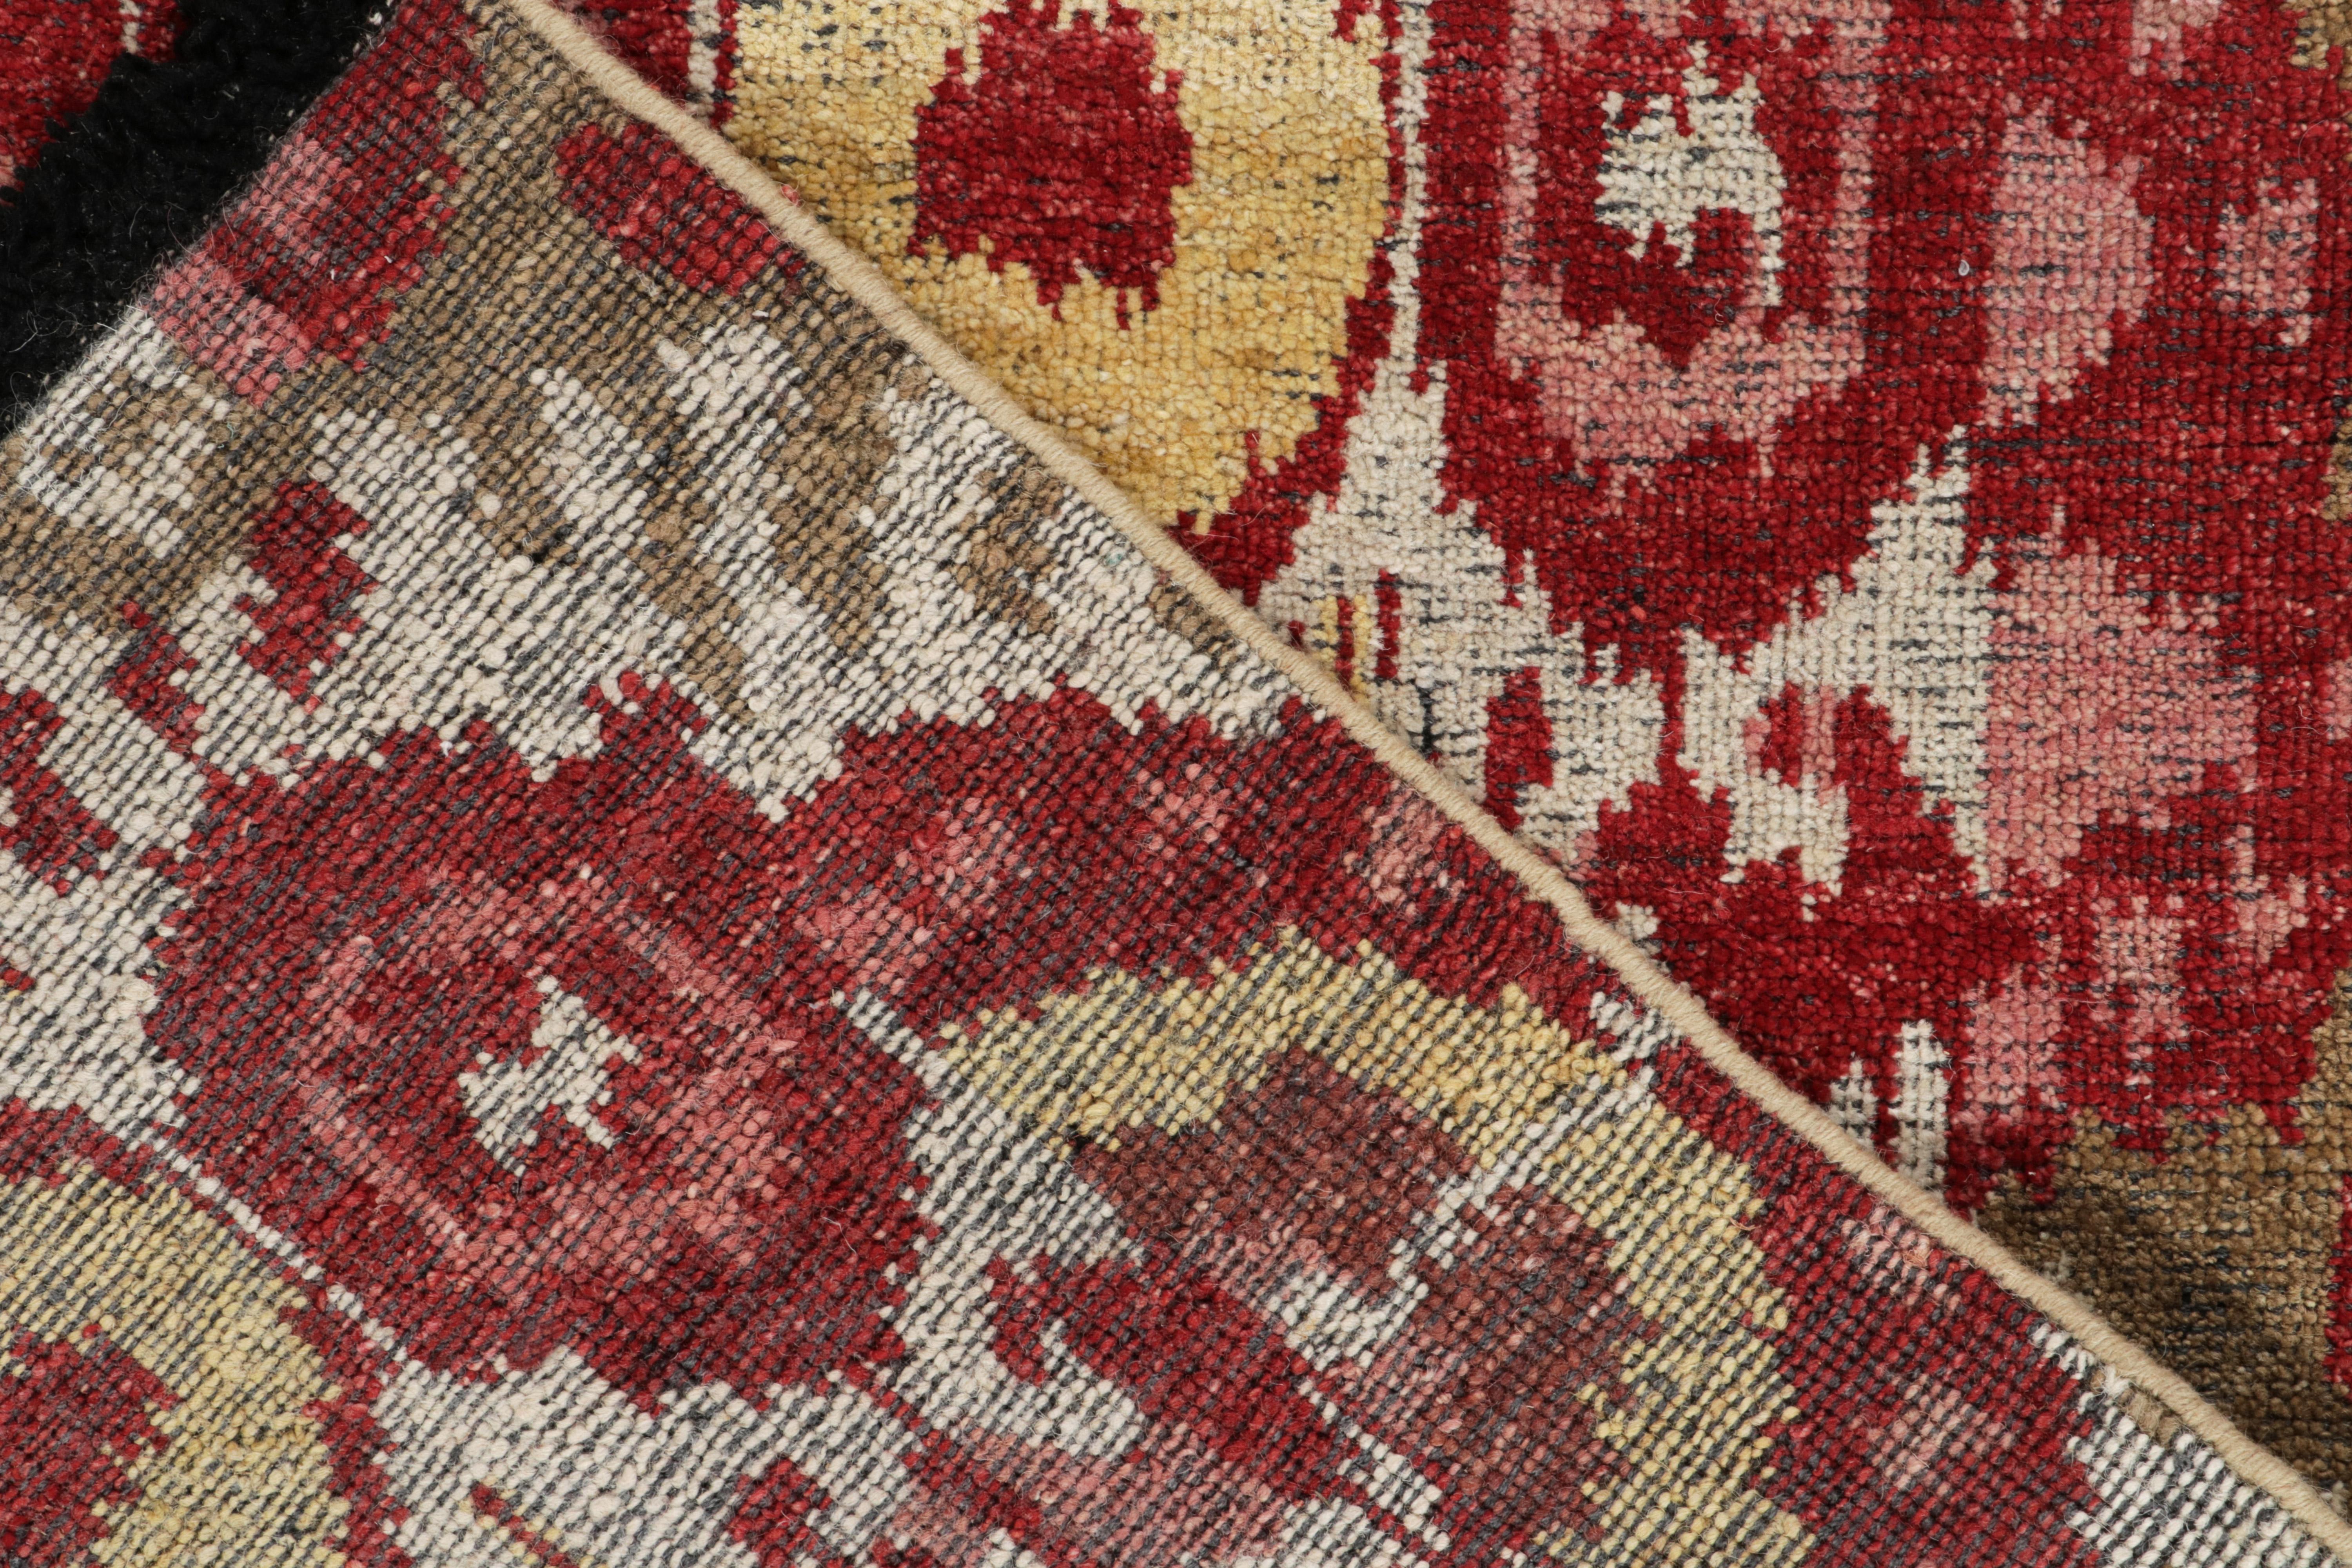 Wool Rug & Kilim's Tribal Style rug in Red, Yellow, Green, White Ikats Pattern For Sale